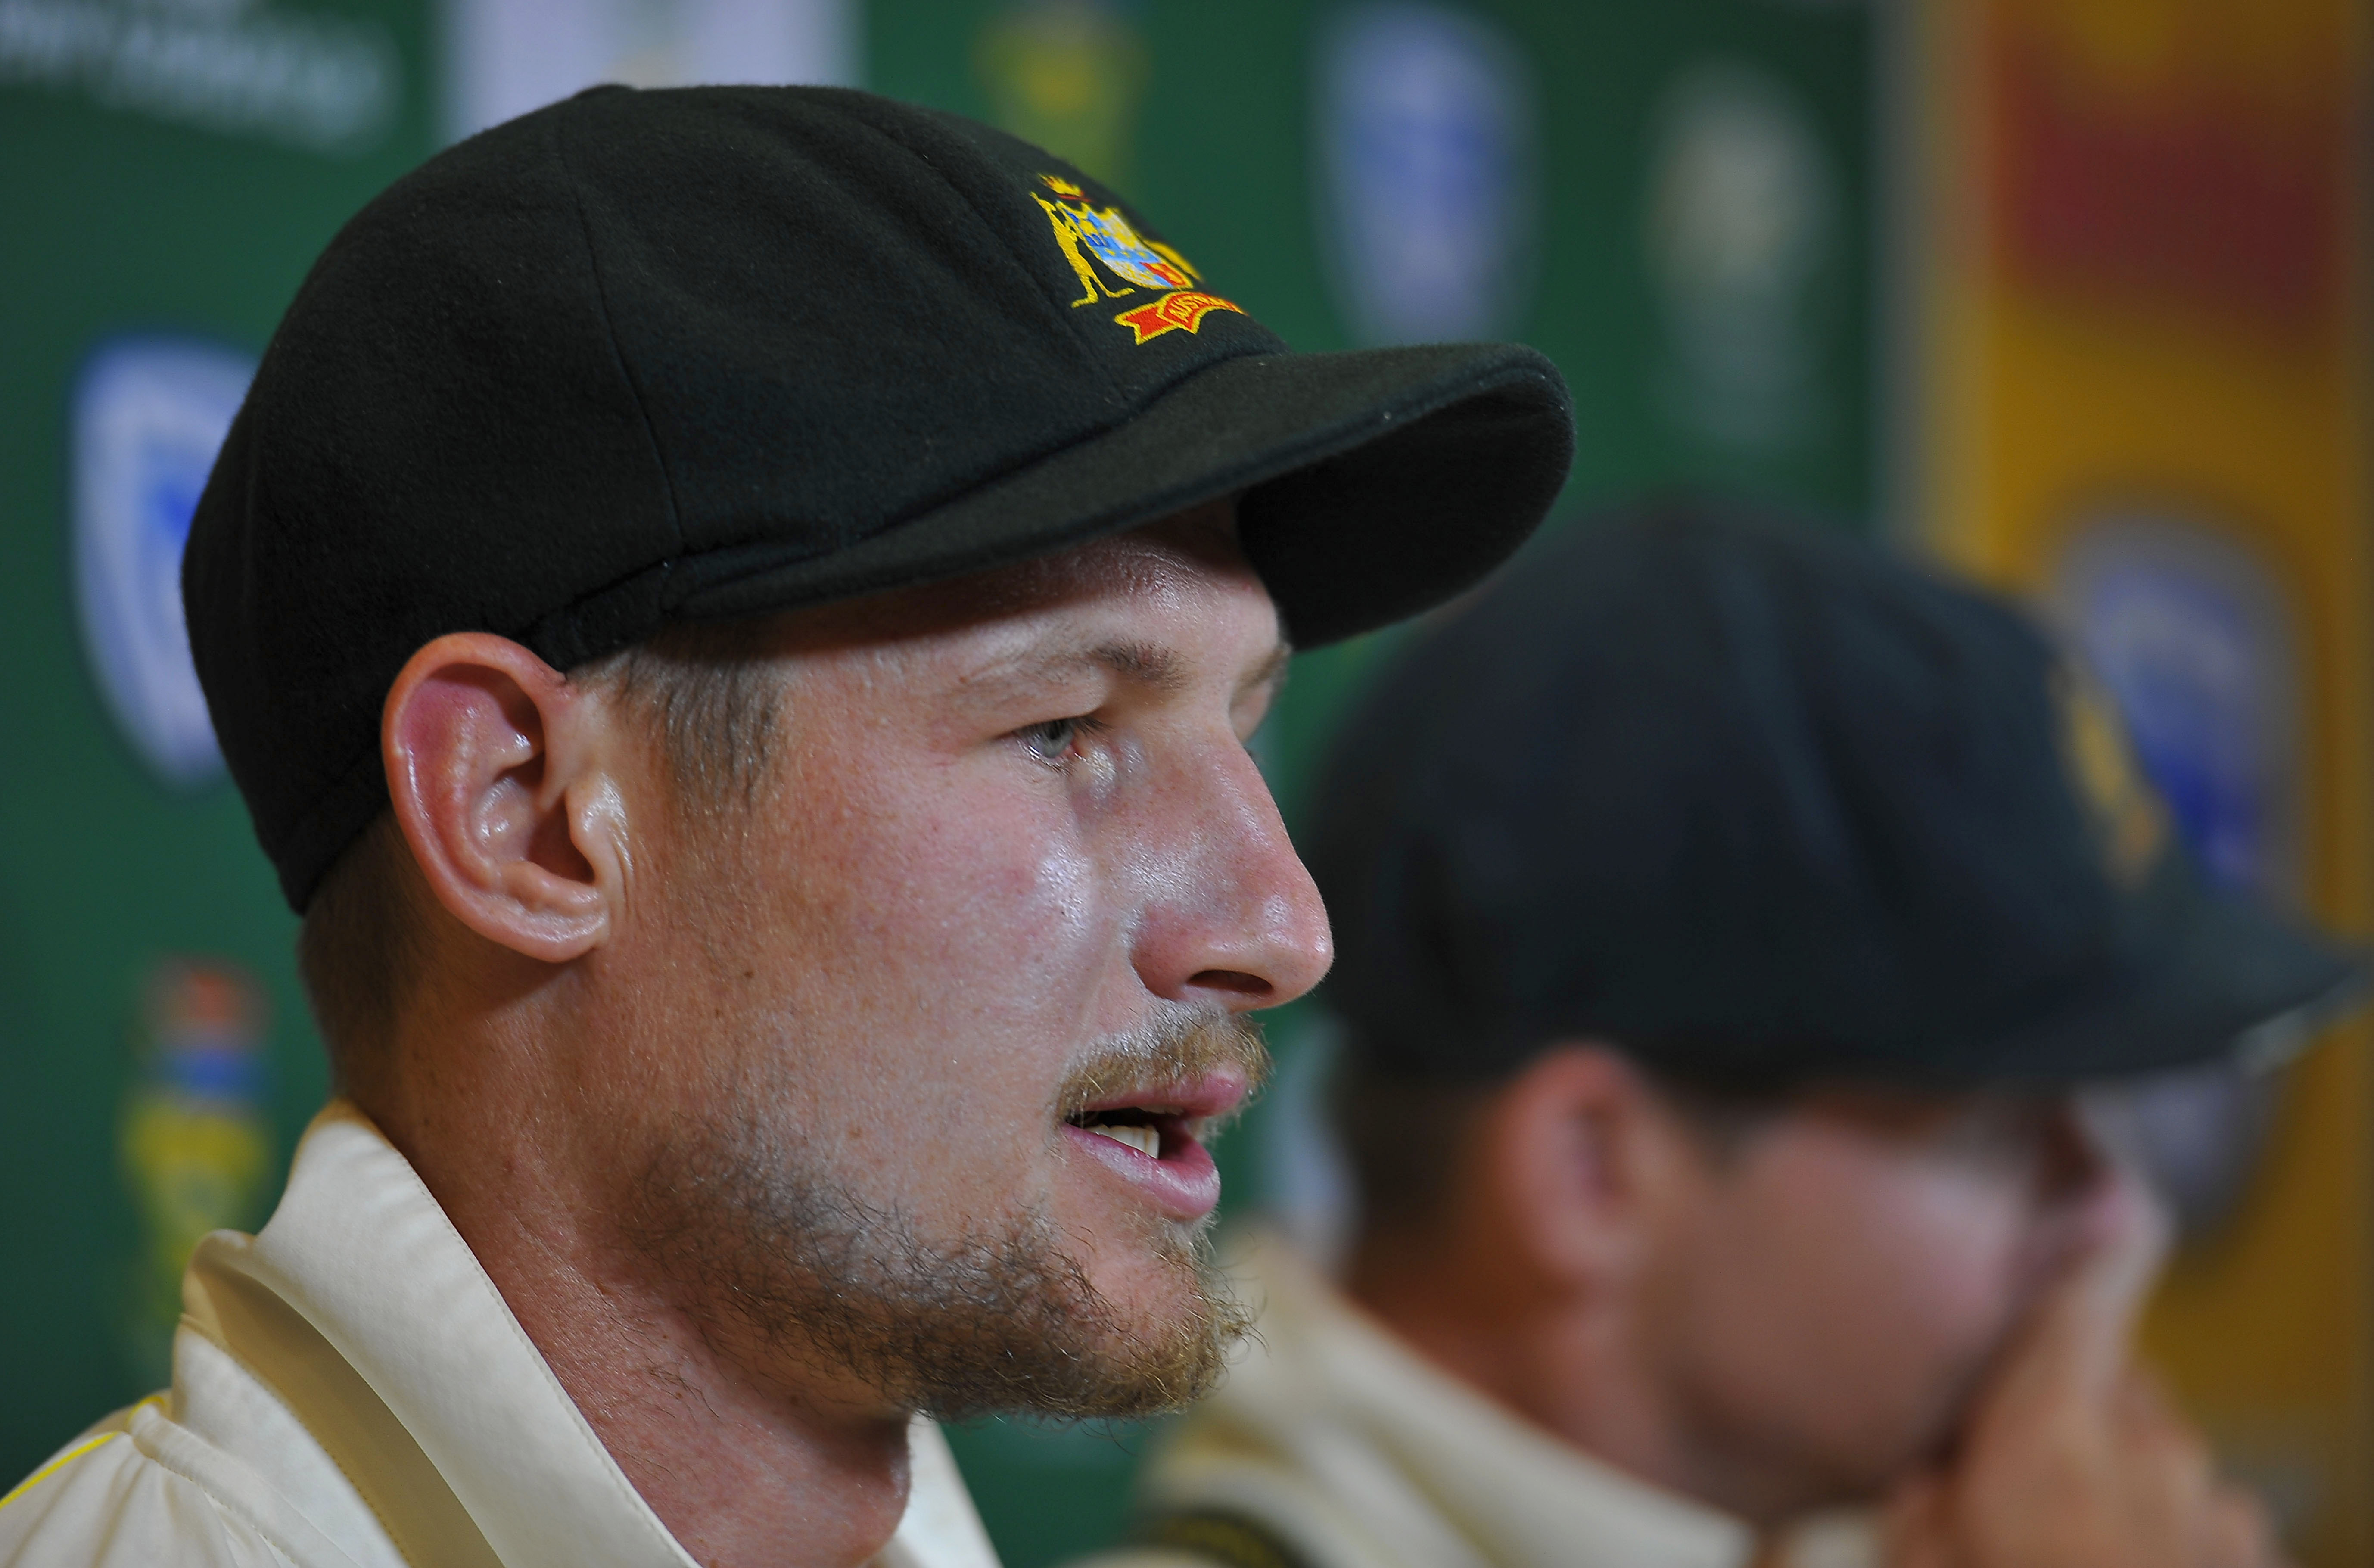 Cameron Bancroft to play for Durham in 2019